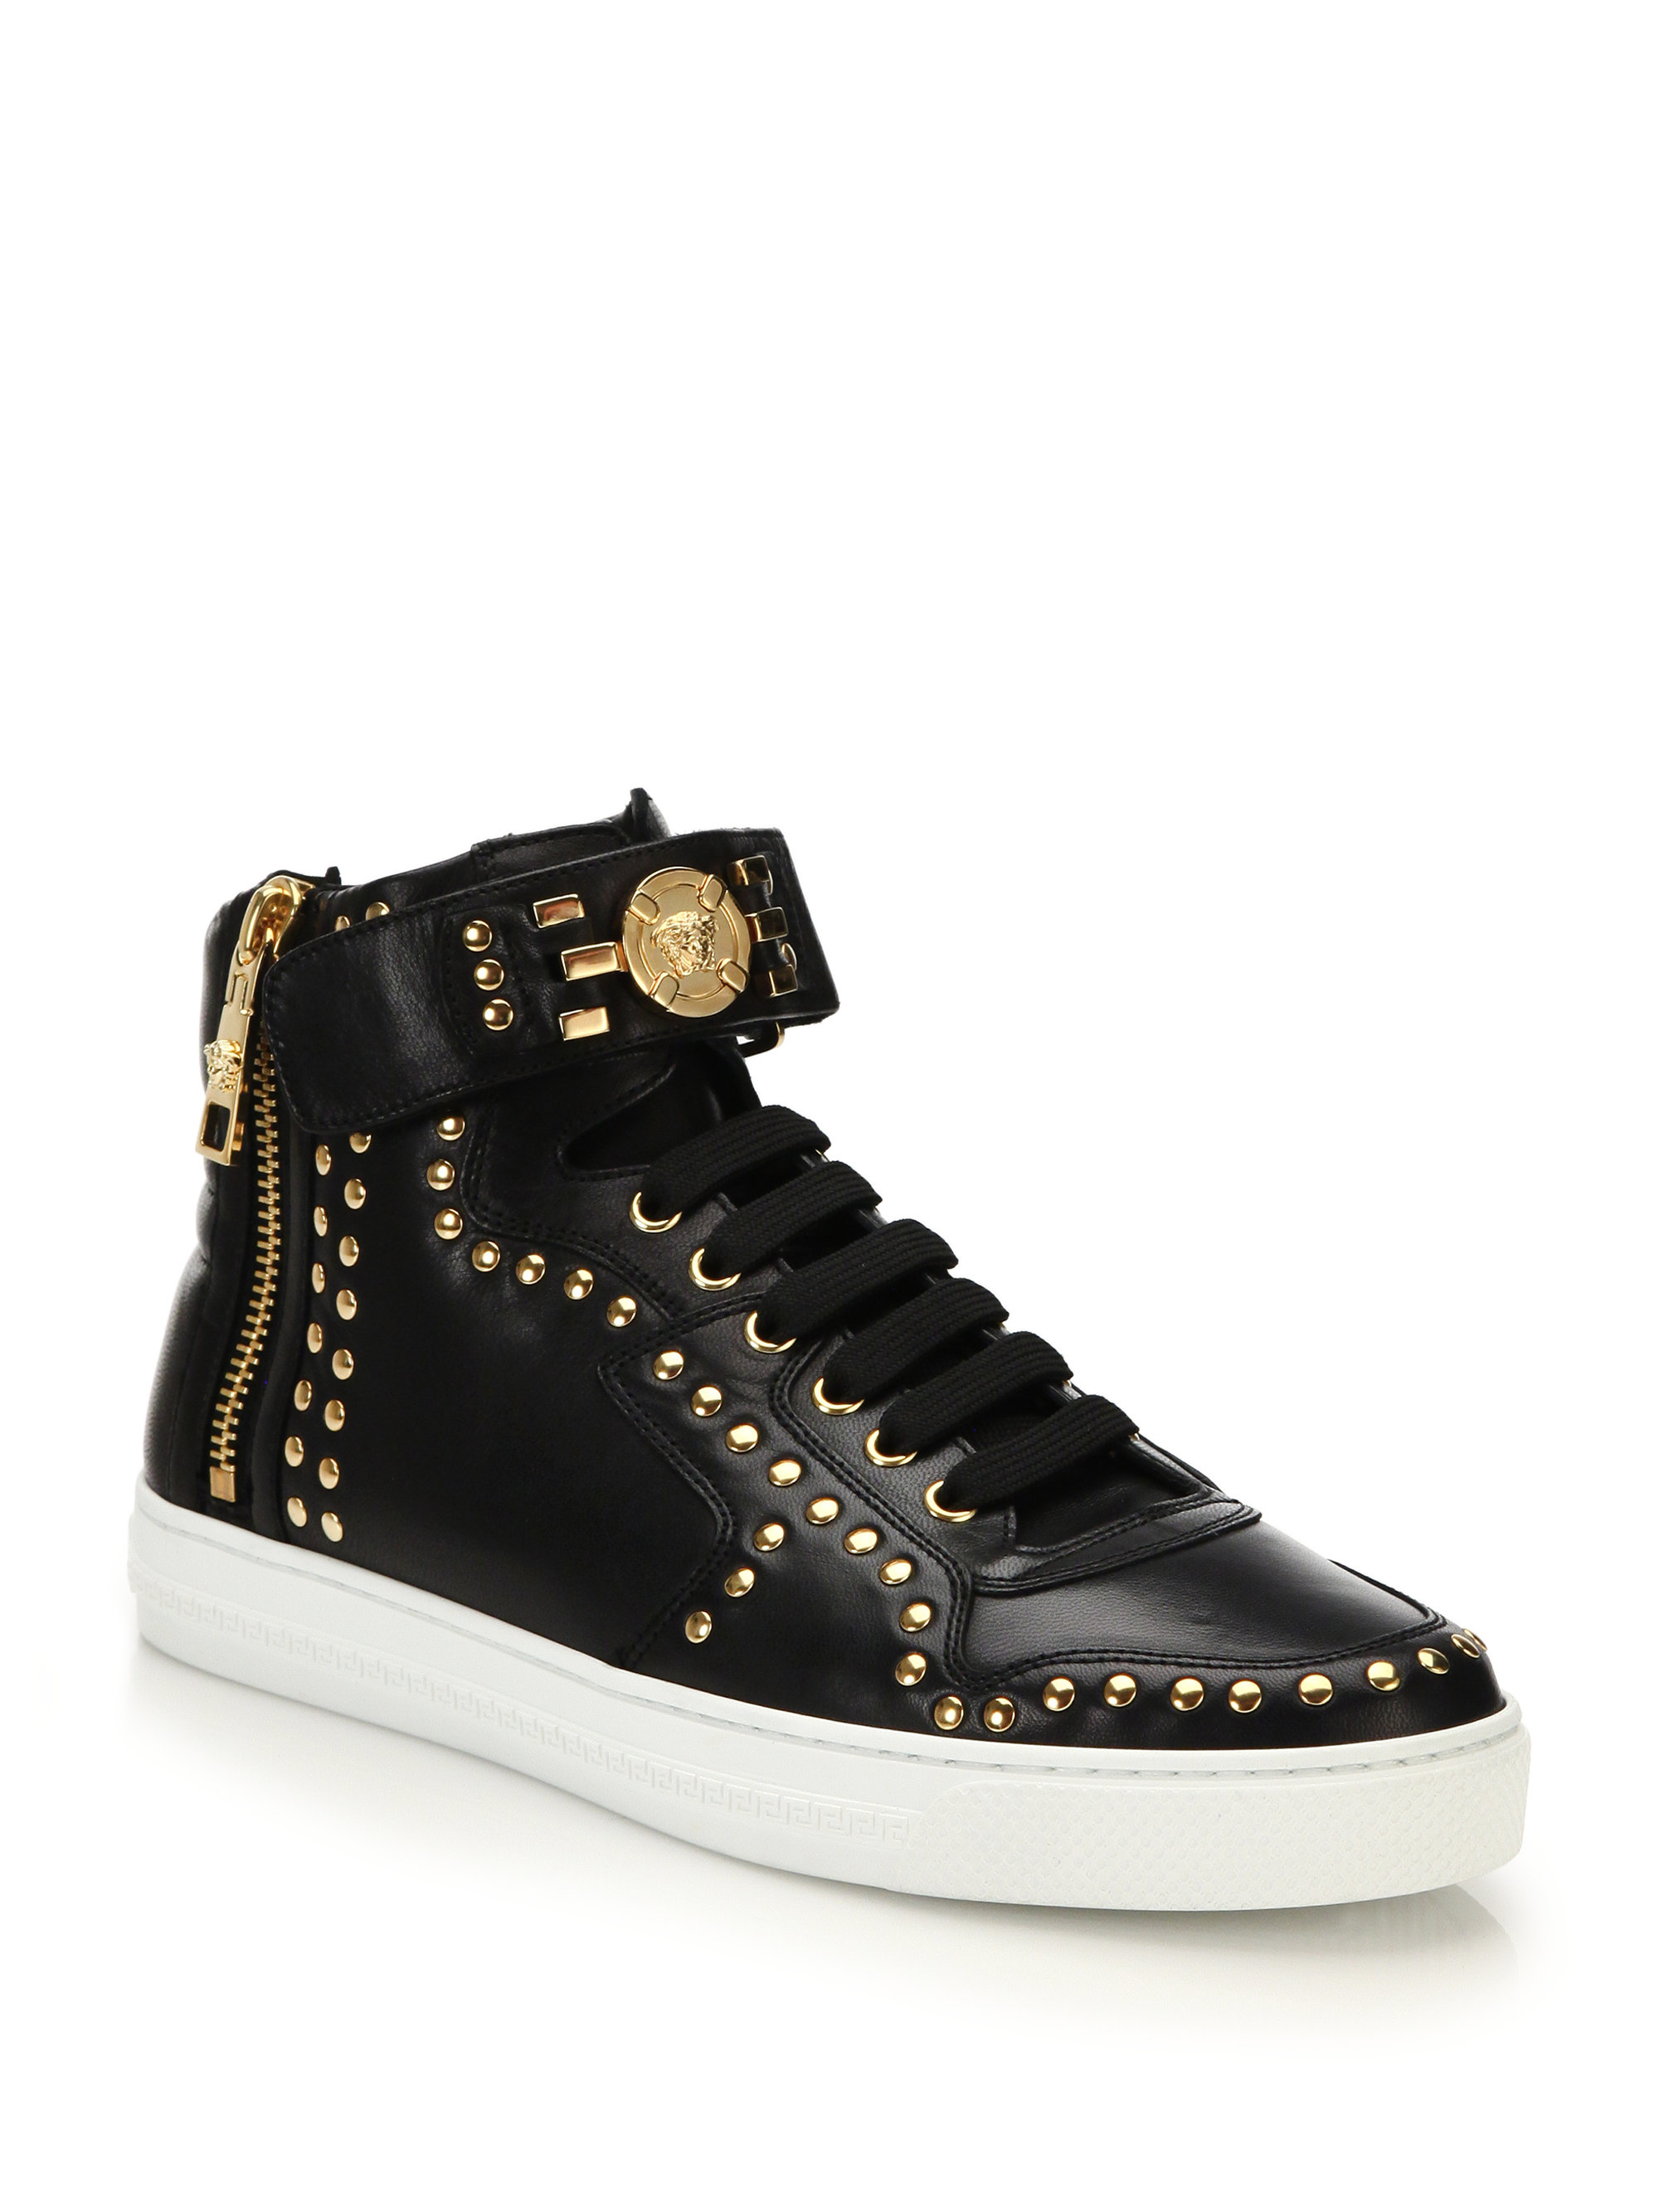 Versace Leather Studded Logo High-top Sneakers in Nero (Black) for Men - Lyst